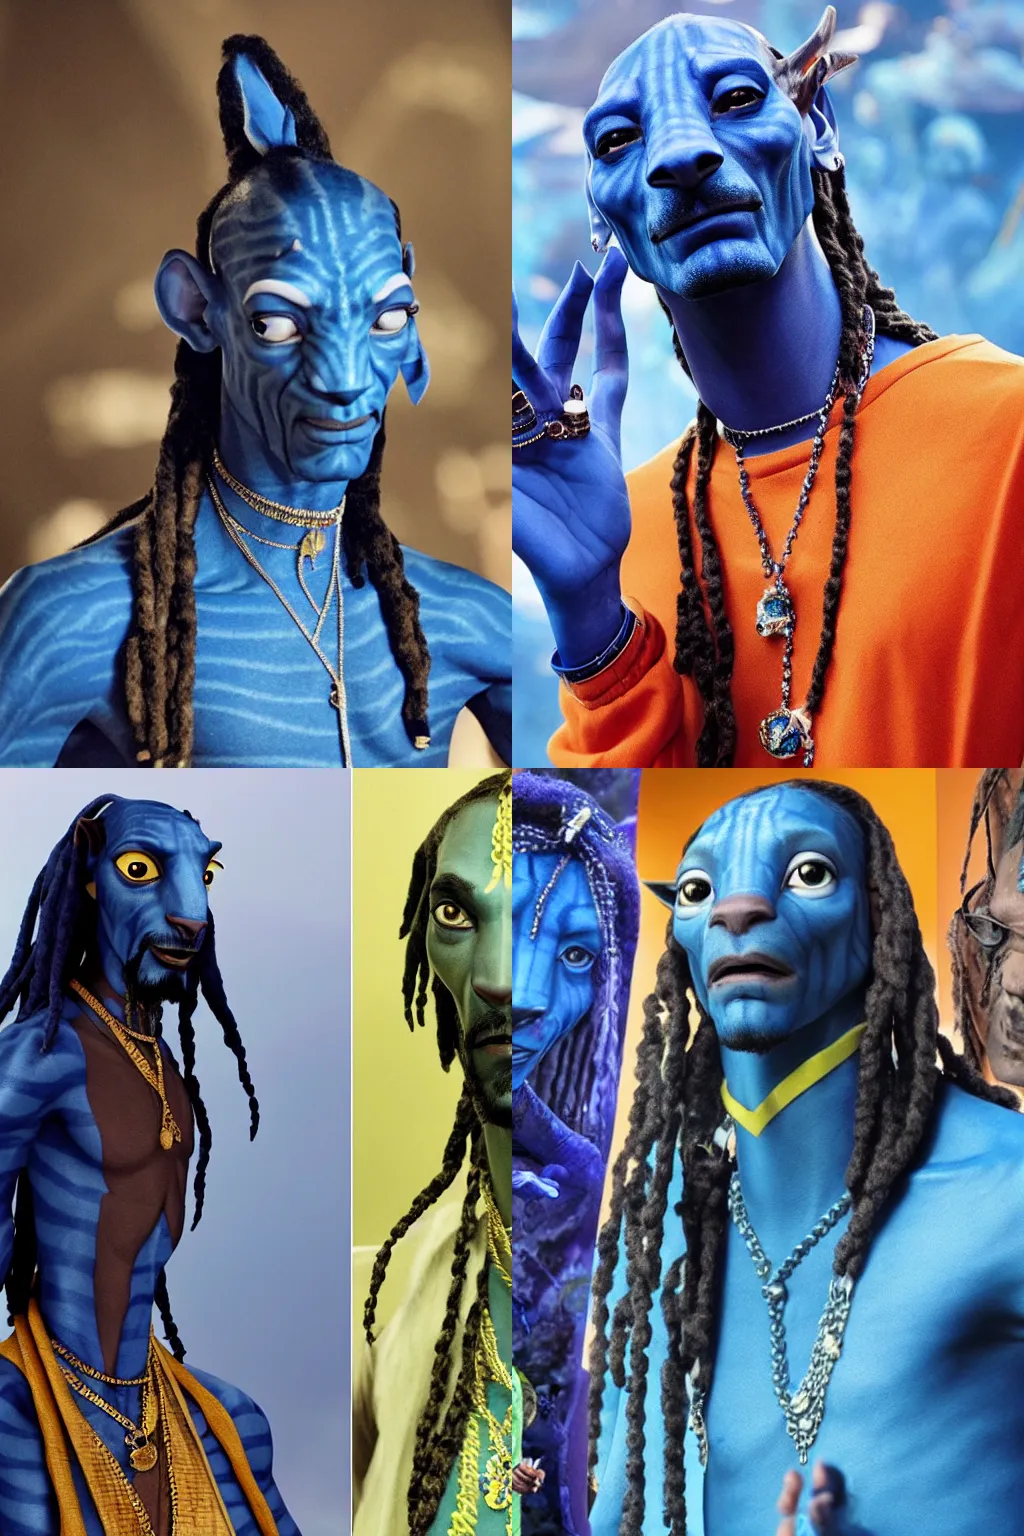 Prompt: snoop dogg as a blue skinned na\'vi in avatar by james cameron